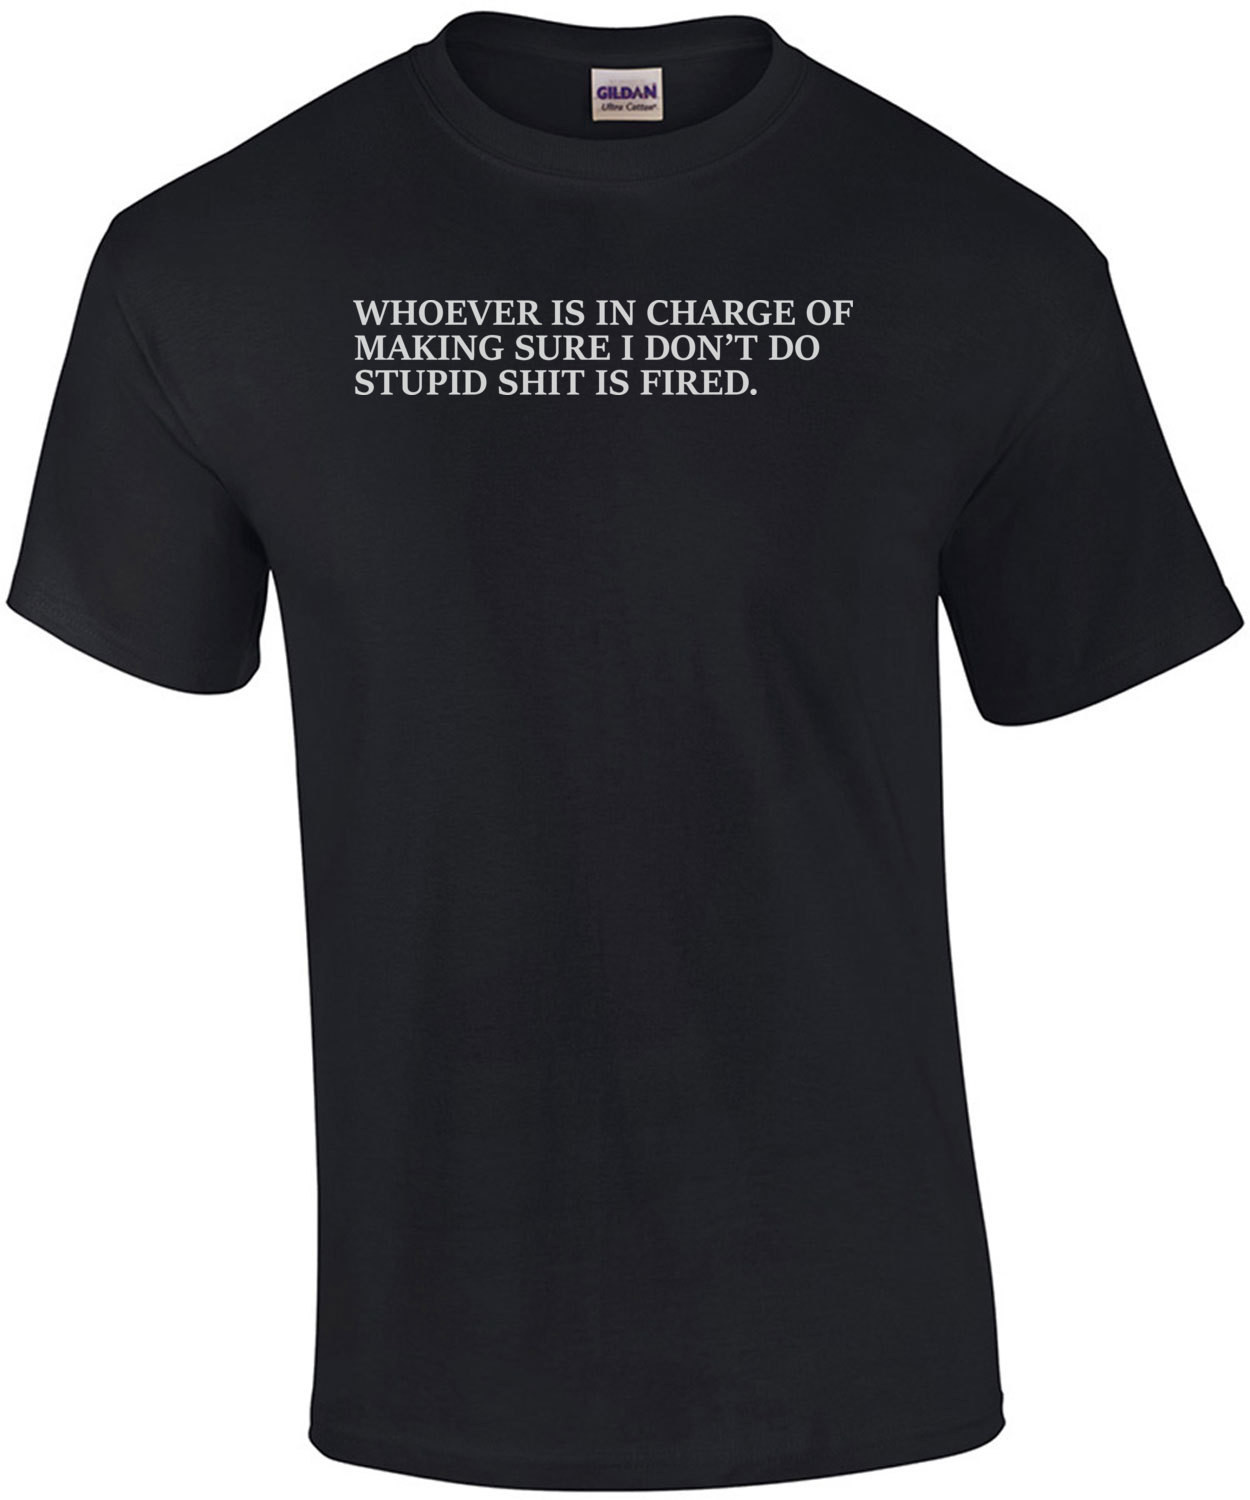 Whoever Is In Charge Of Making Sure I Don't Do Stupid Shit Is Fired T-Shirt